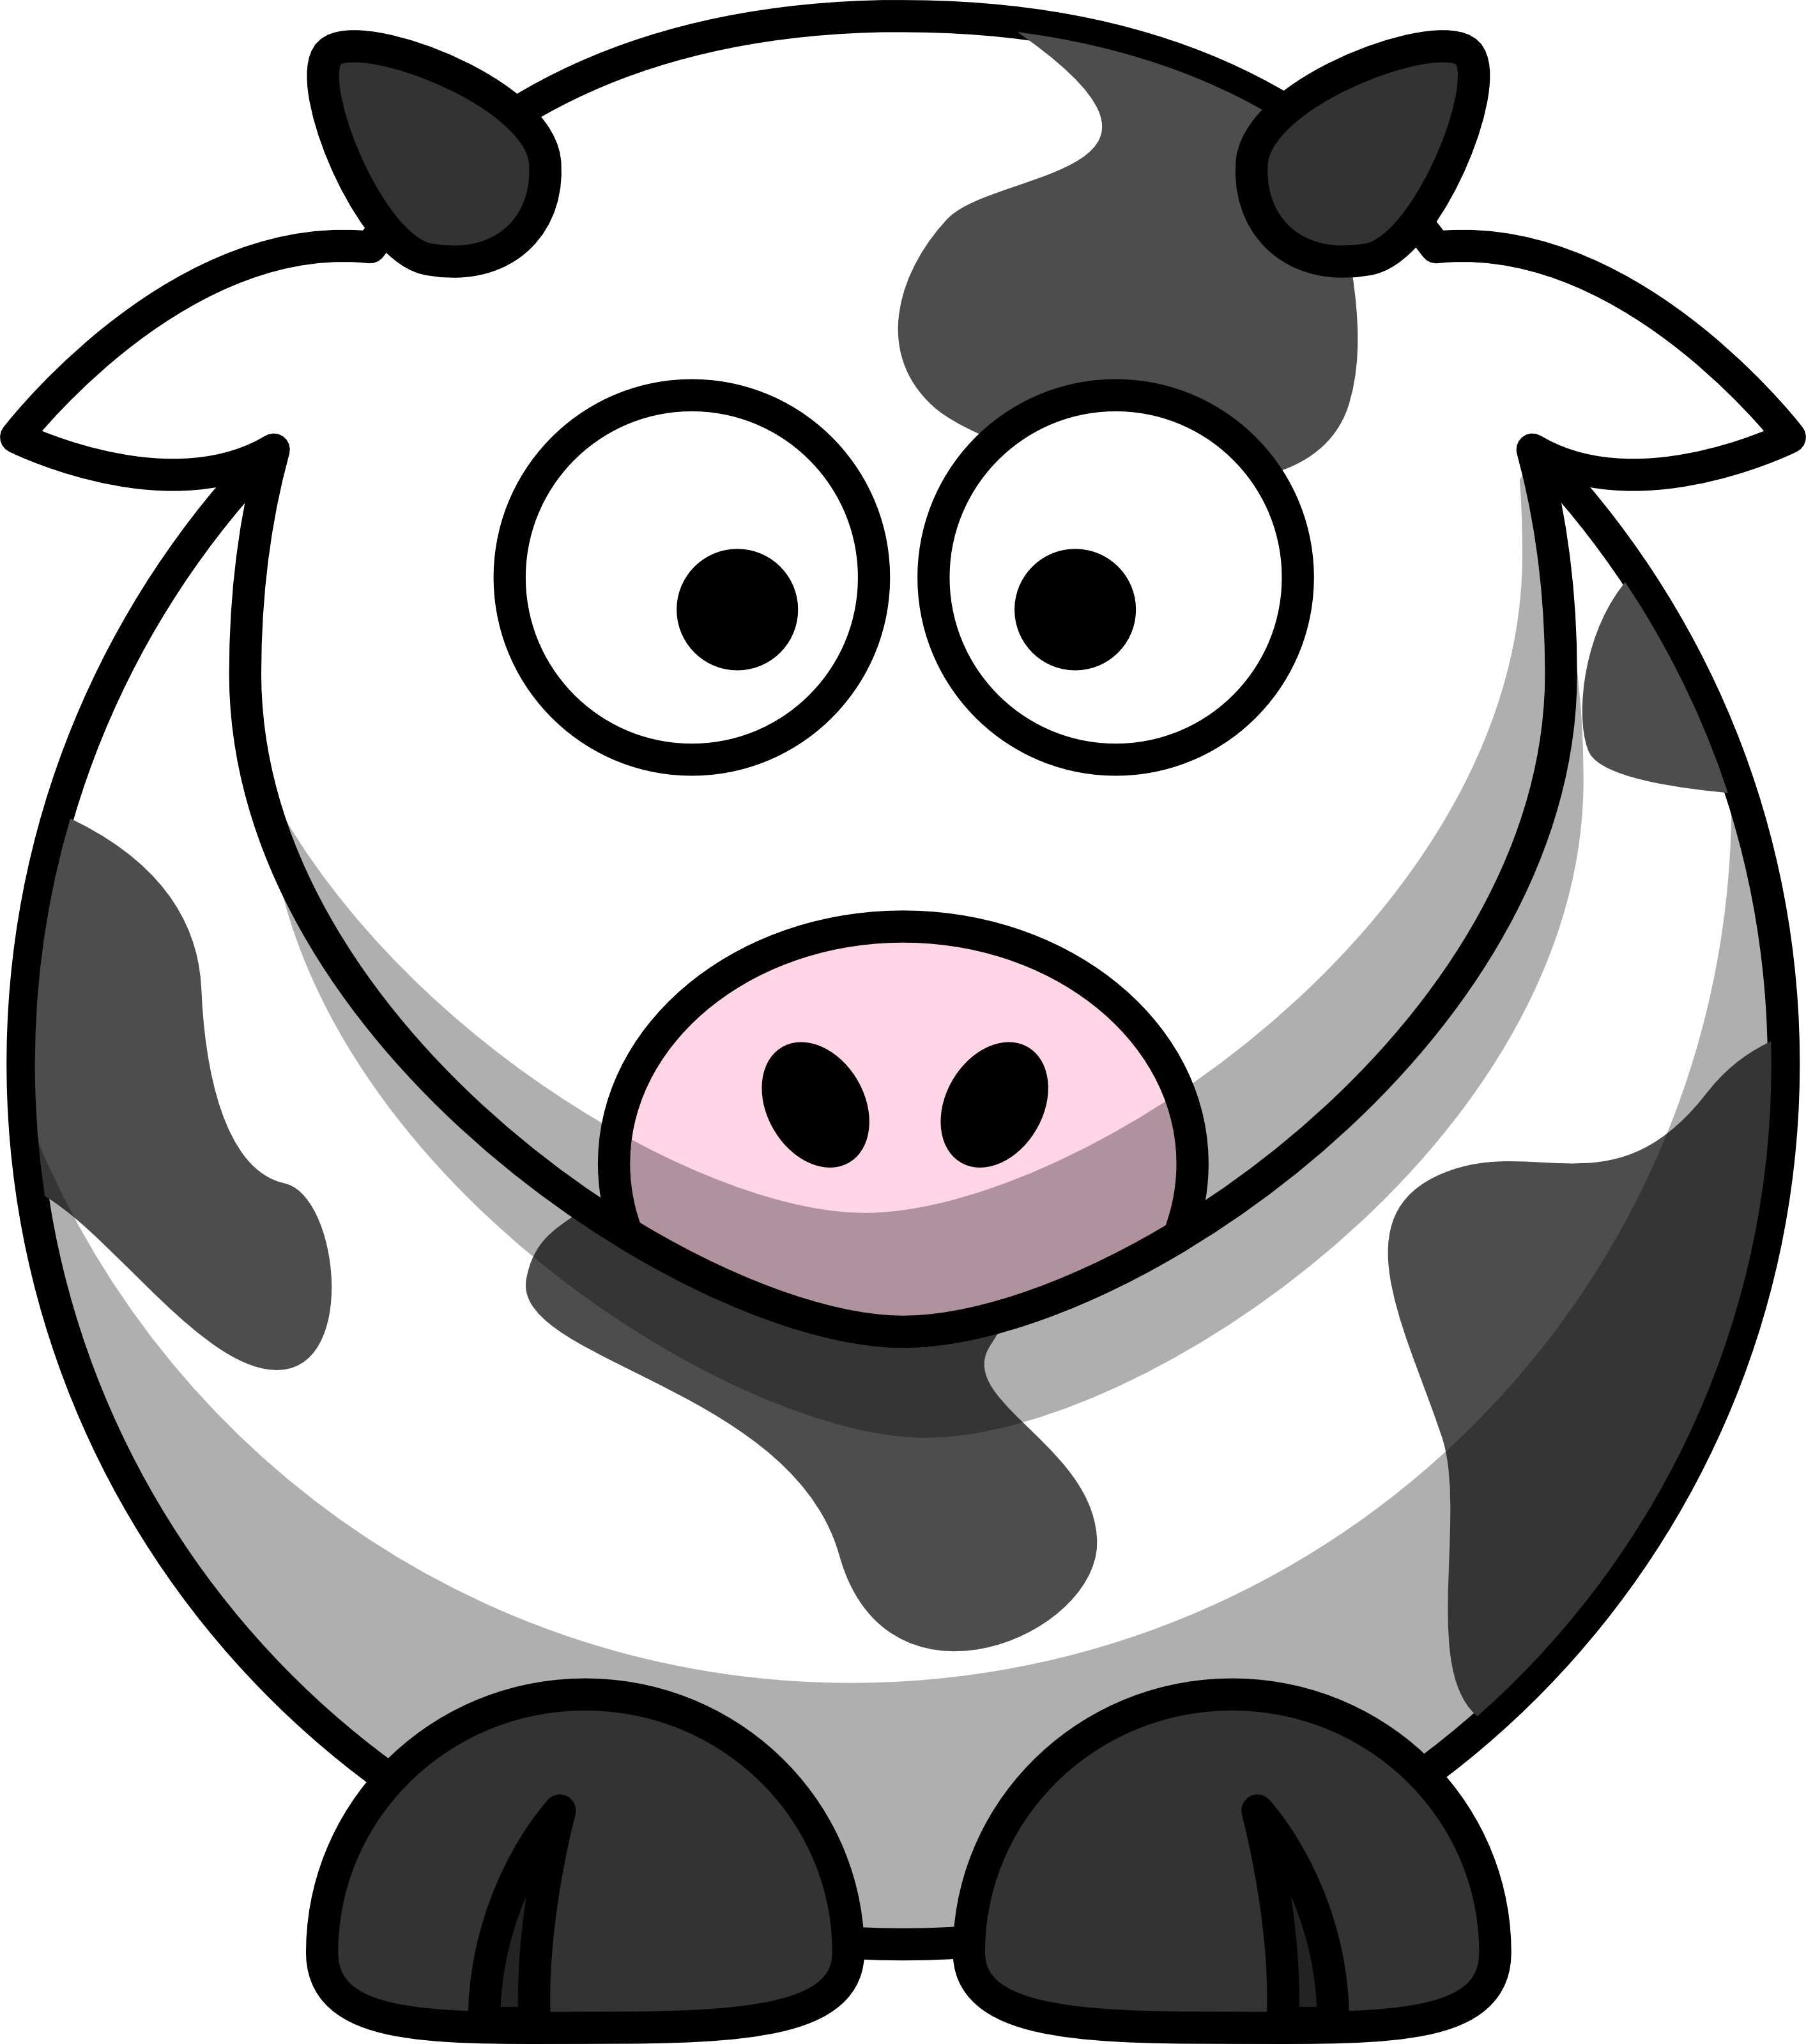 Cows clipart easy, Cows easy Transparent FREE for download